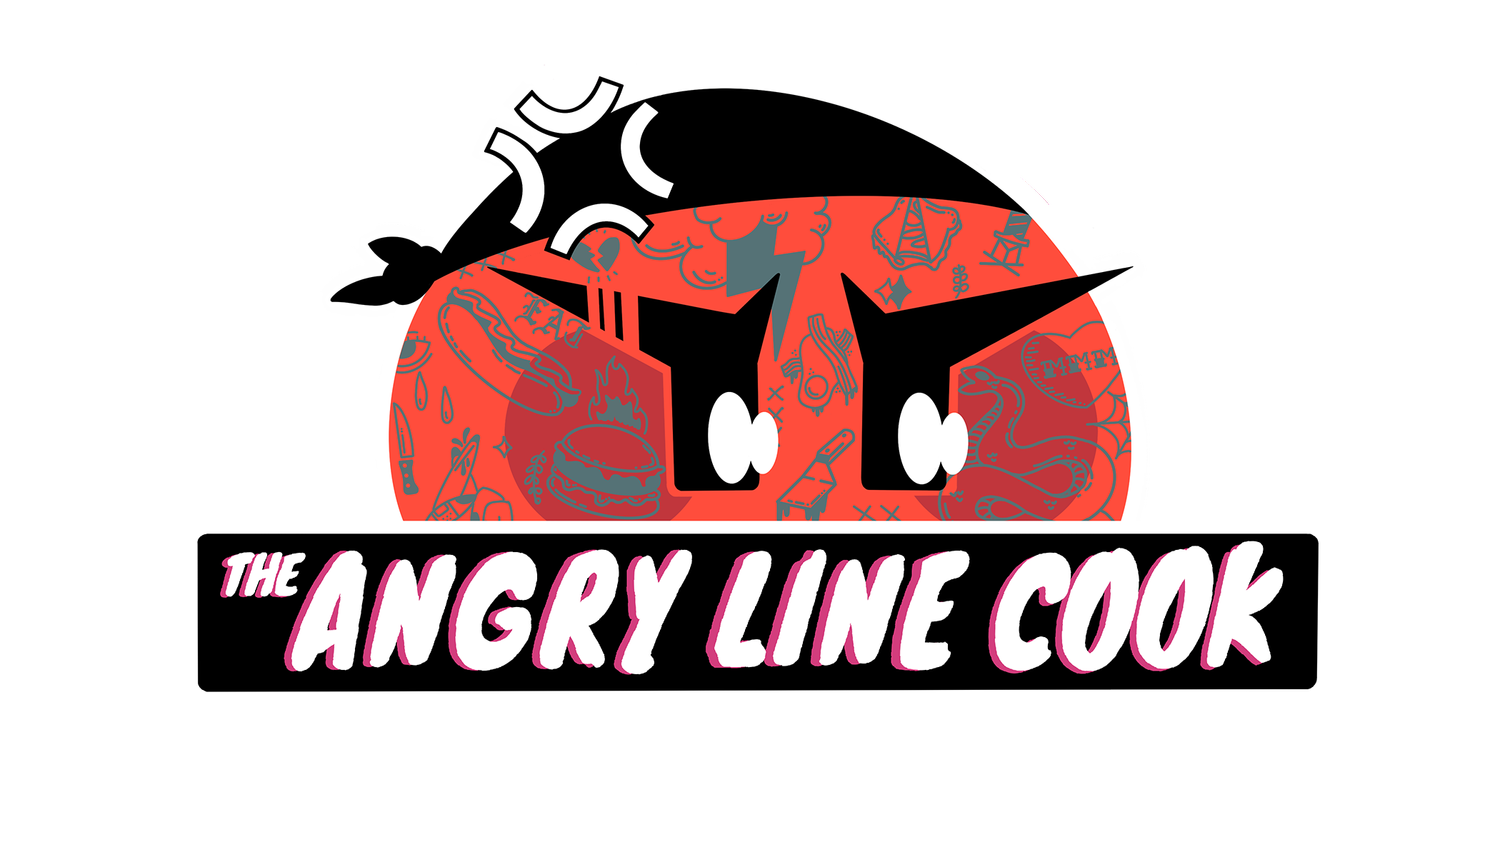 THE ANGRY LINE COOK FOOD TRUCK